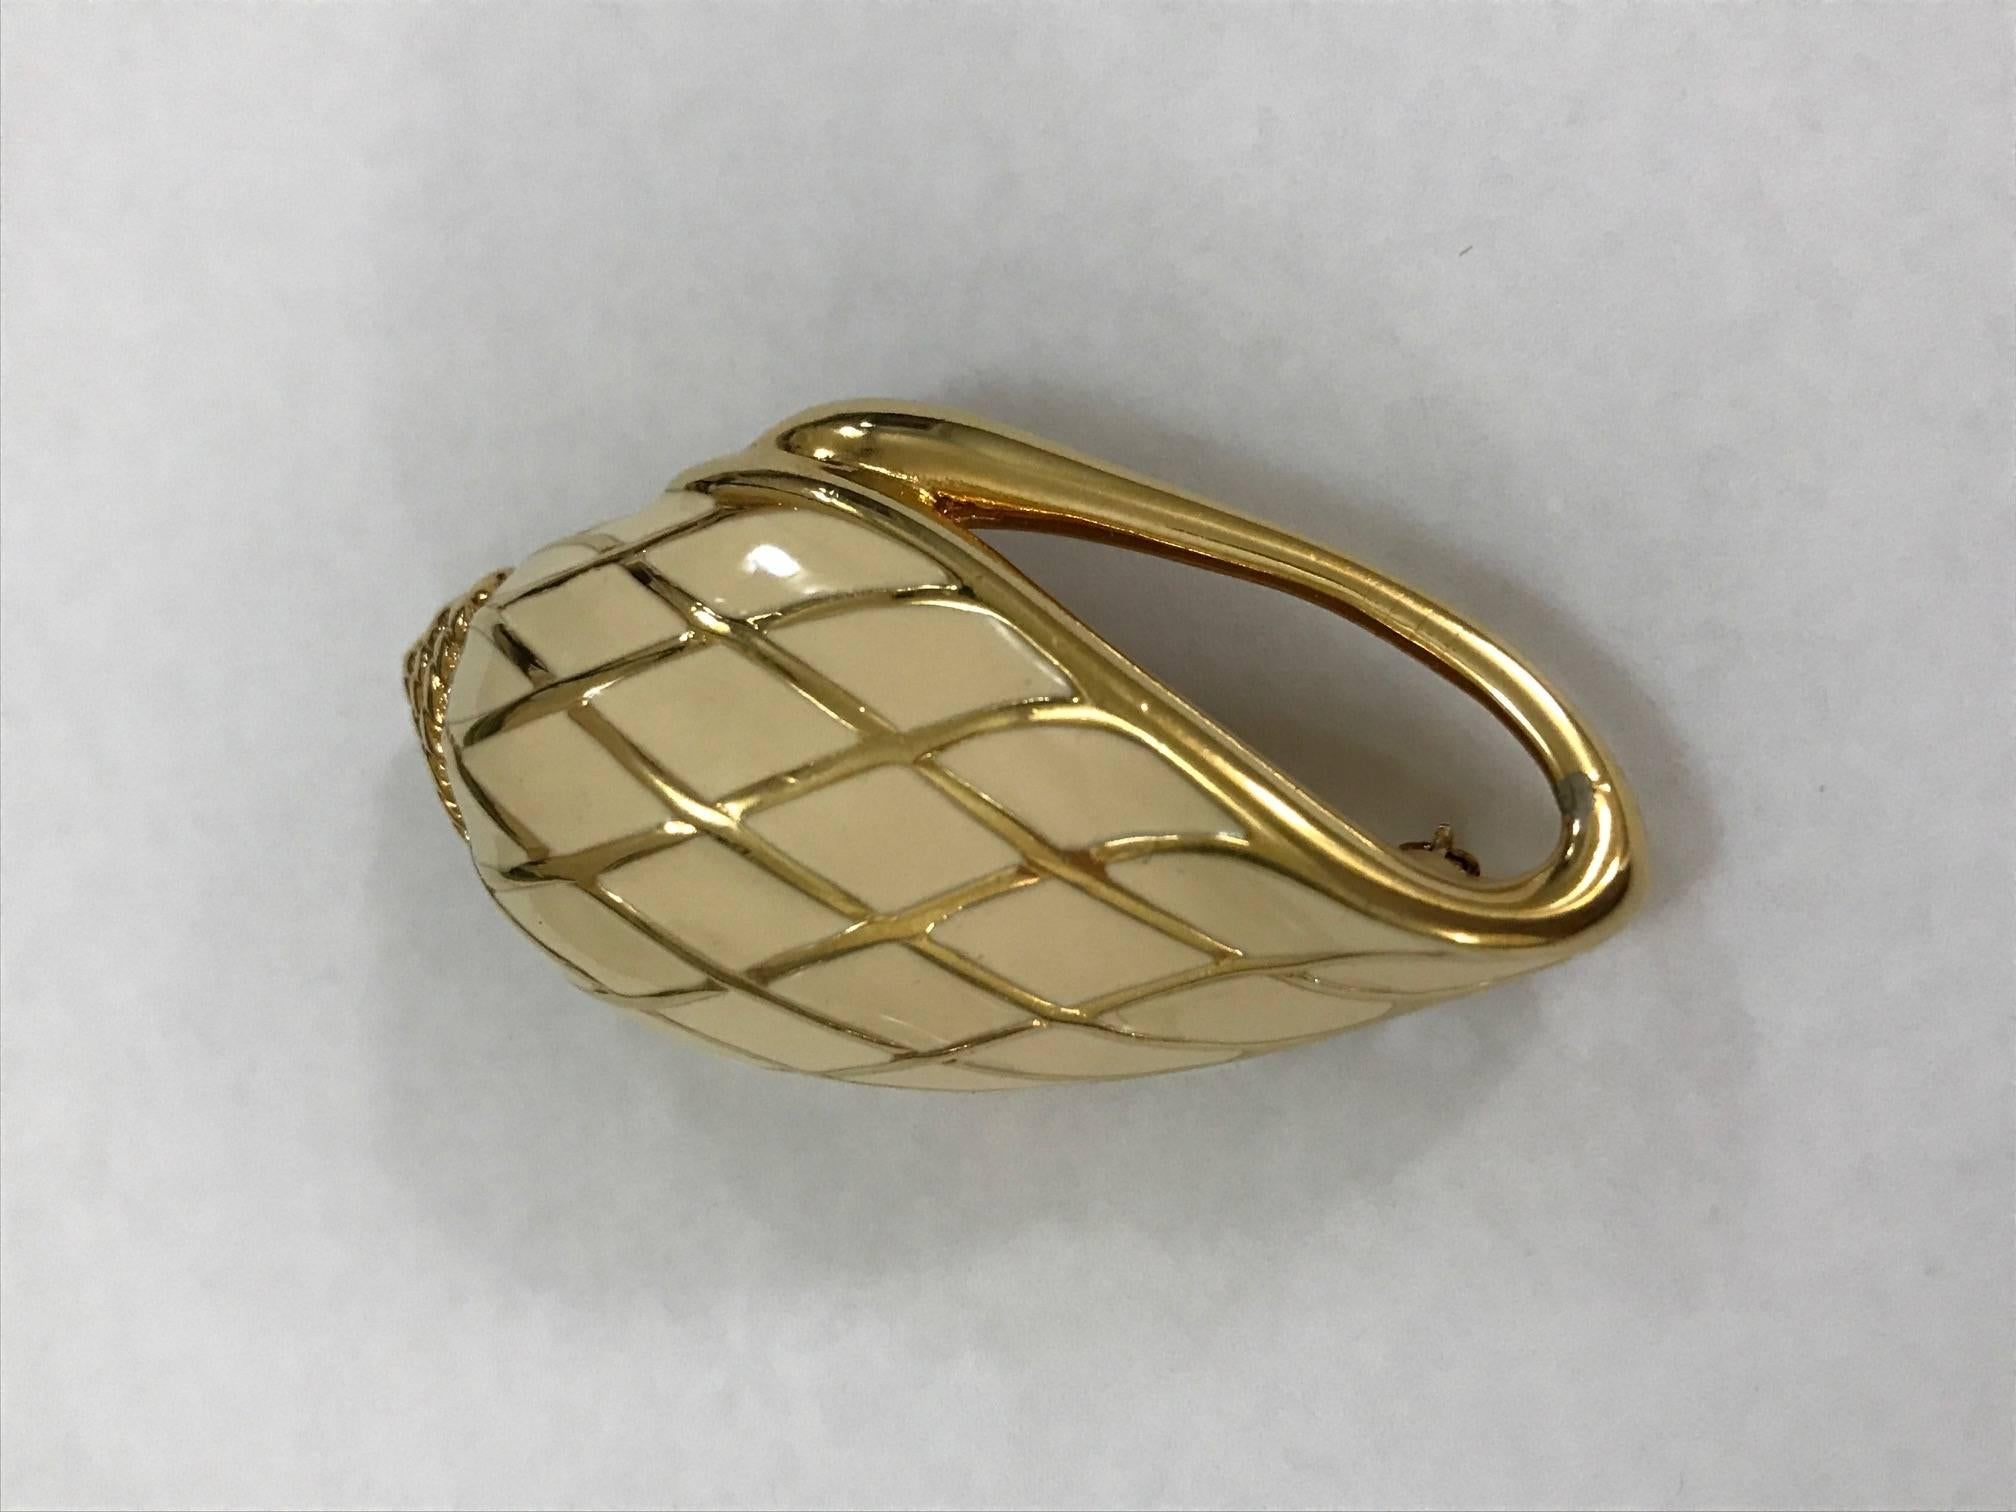 Trifari 1980s (estimated) gold and cream shell pin.

Measures approximately 2 1/4" by 1 1/8".

Signed 'TRIFARI' at back in block caps.

Very good condition, tiny hard to spot chip to gold finish right where the top loop curves around from